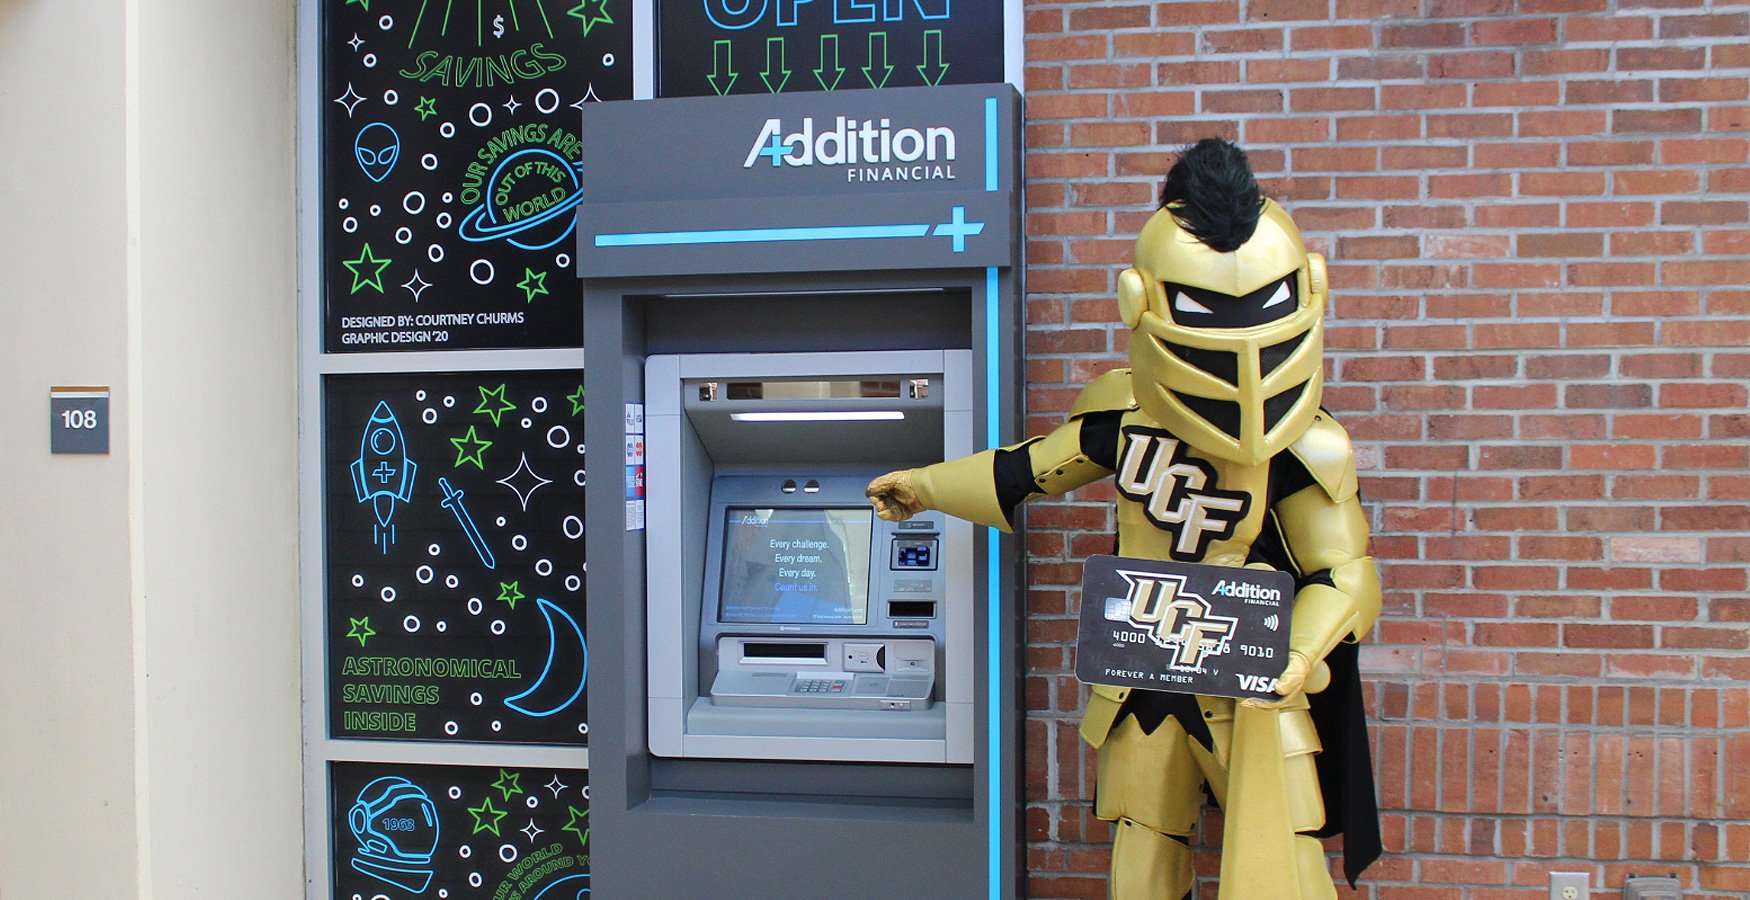 UCF Aspire Checking account Knightro with debit card